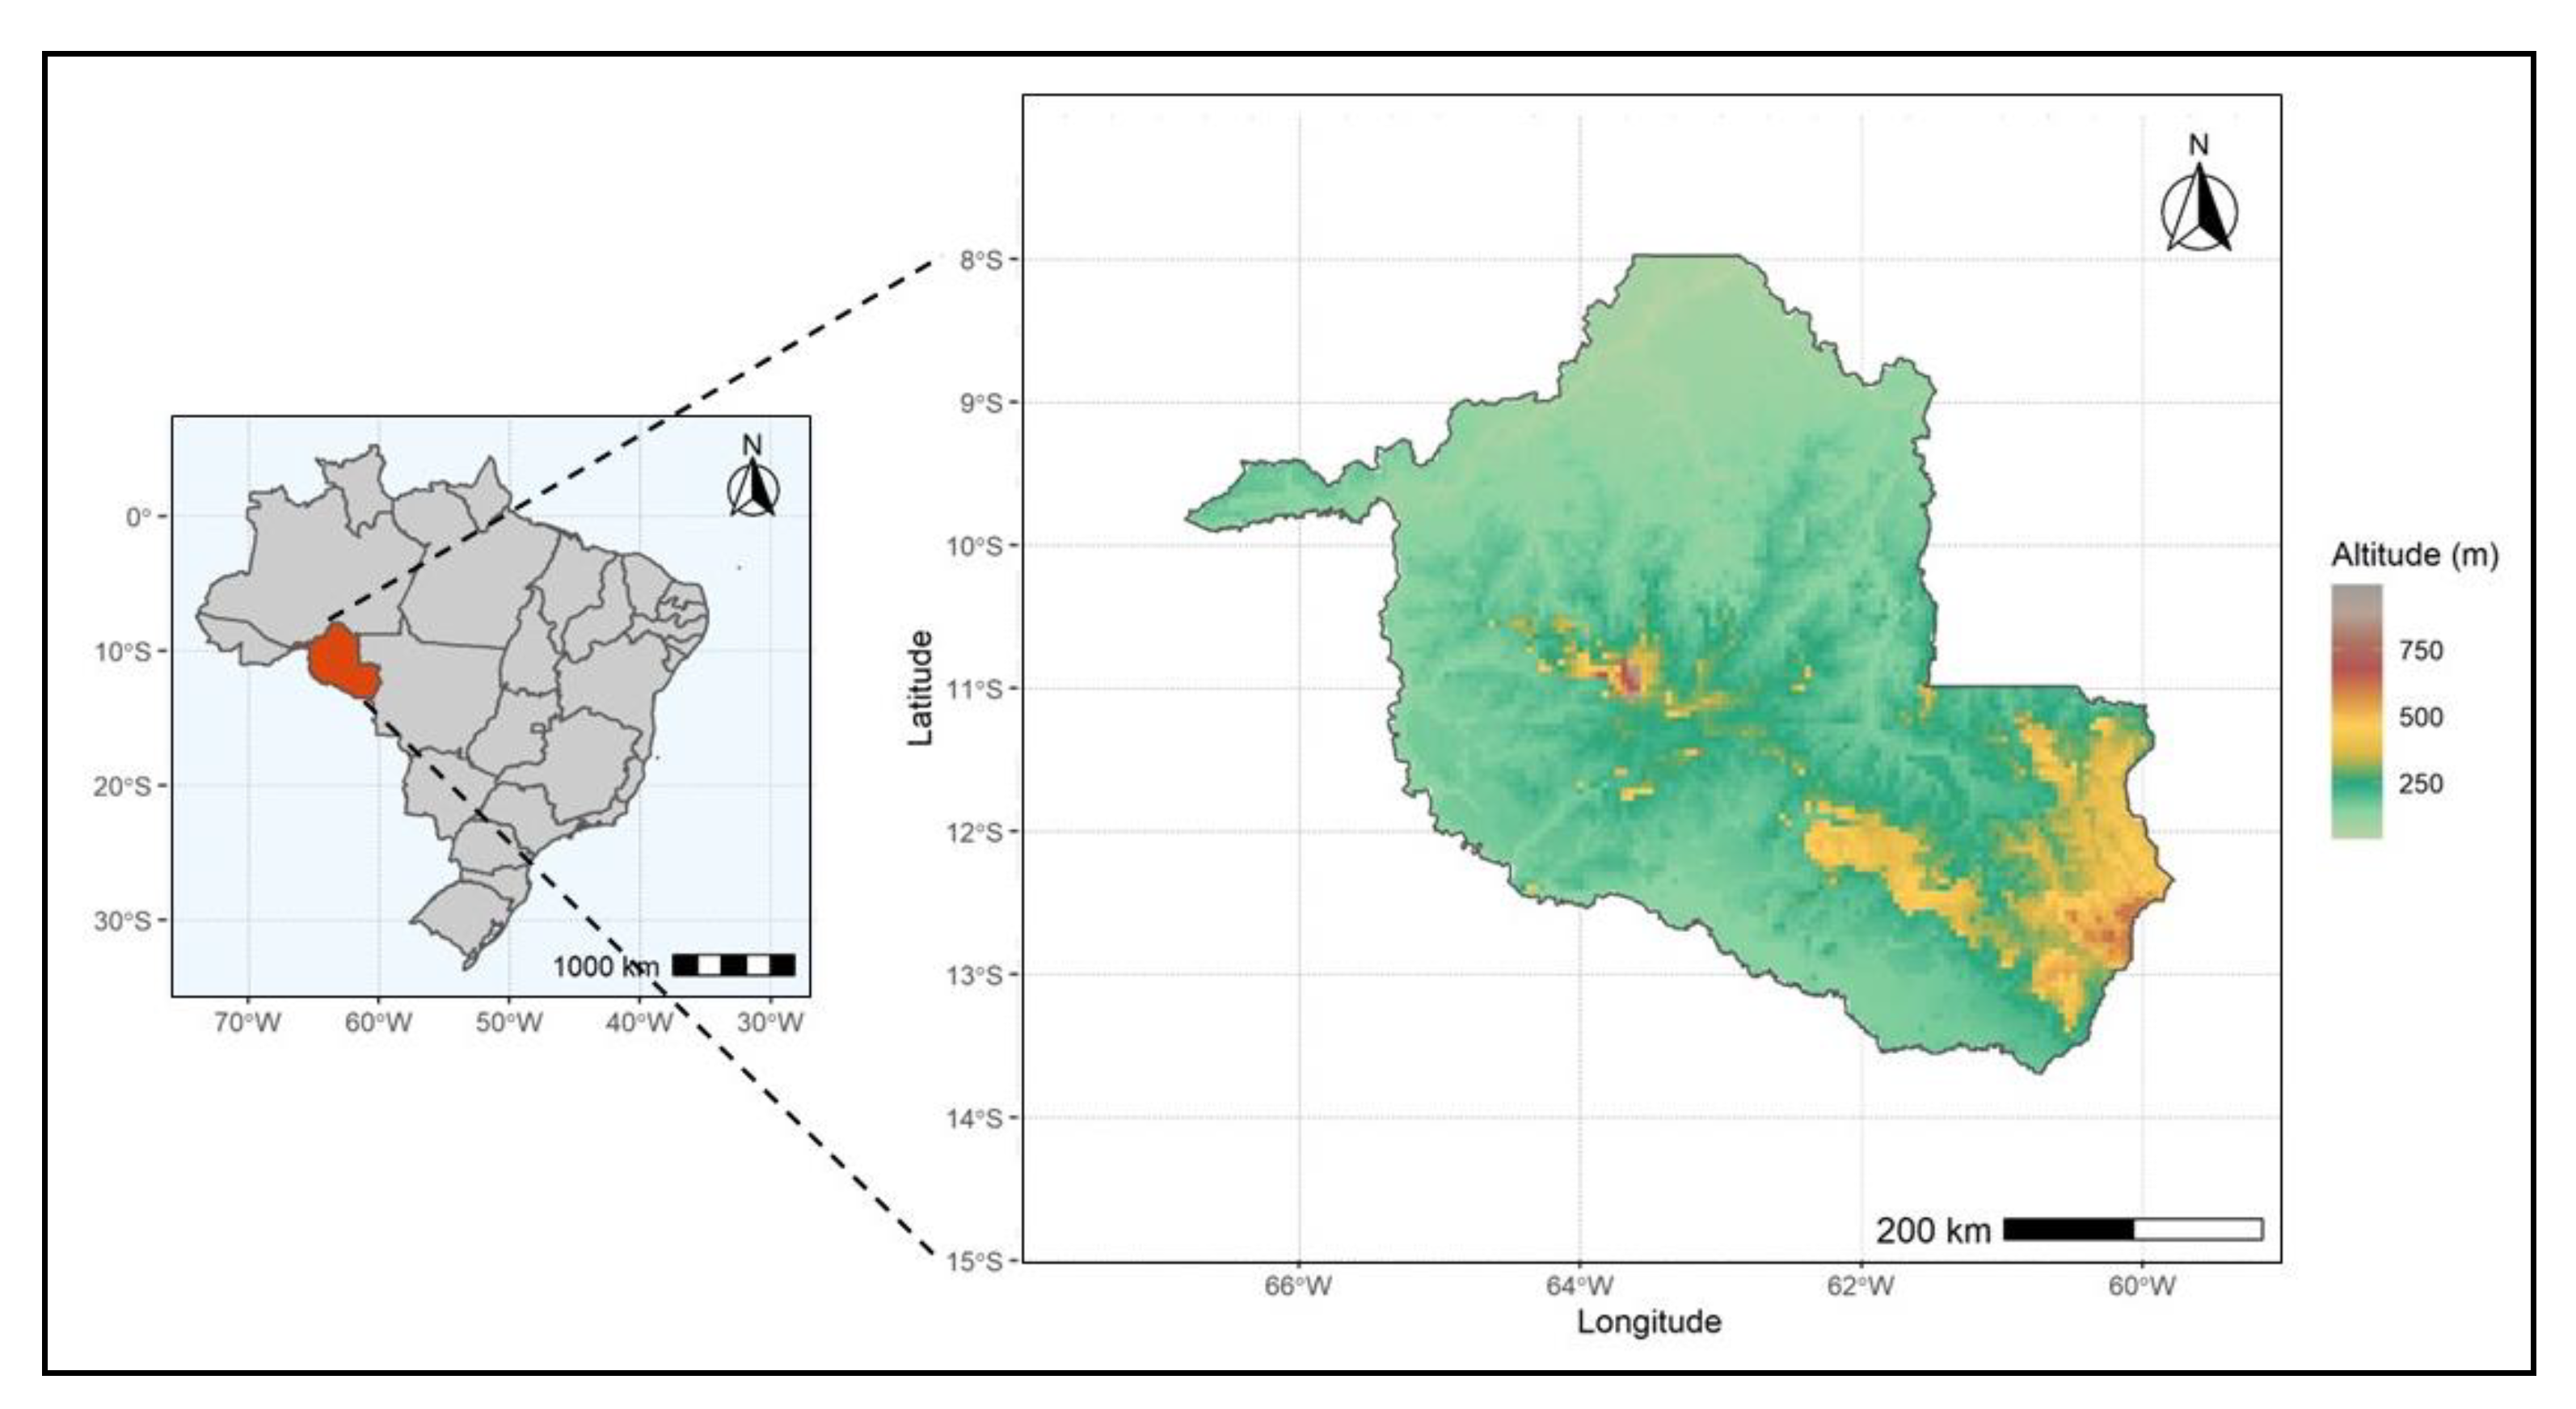 Remote Sensing | Free Full-Text | Analysis of the Influence of  Deforestation on the Microphysical Parameters of Clouds in the Amazon